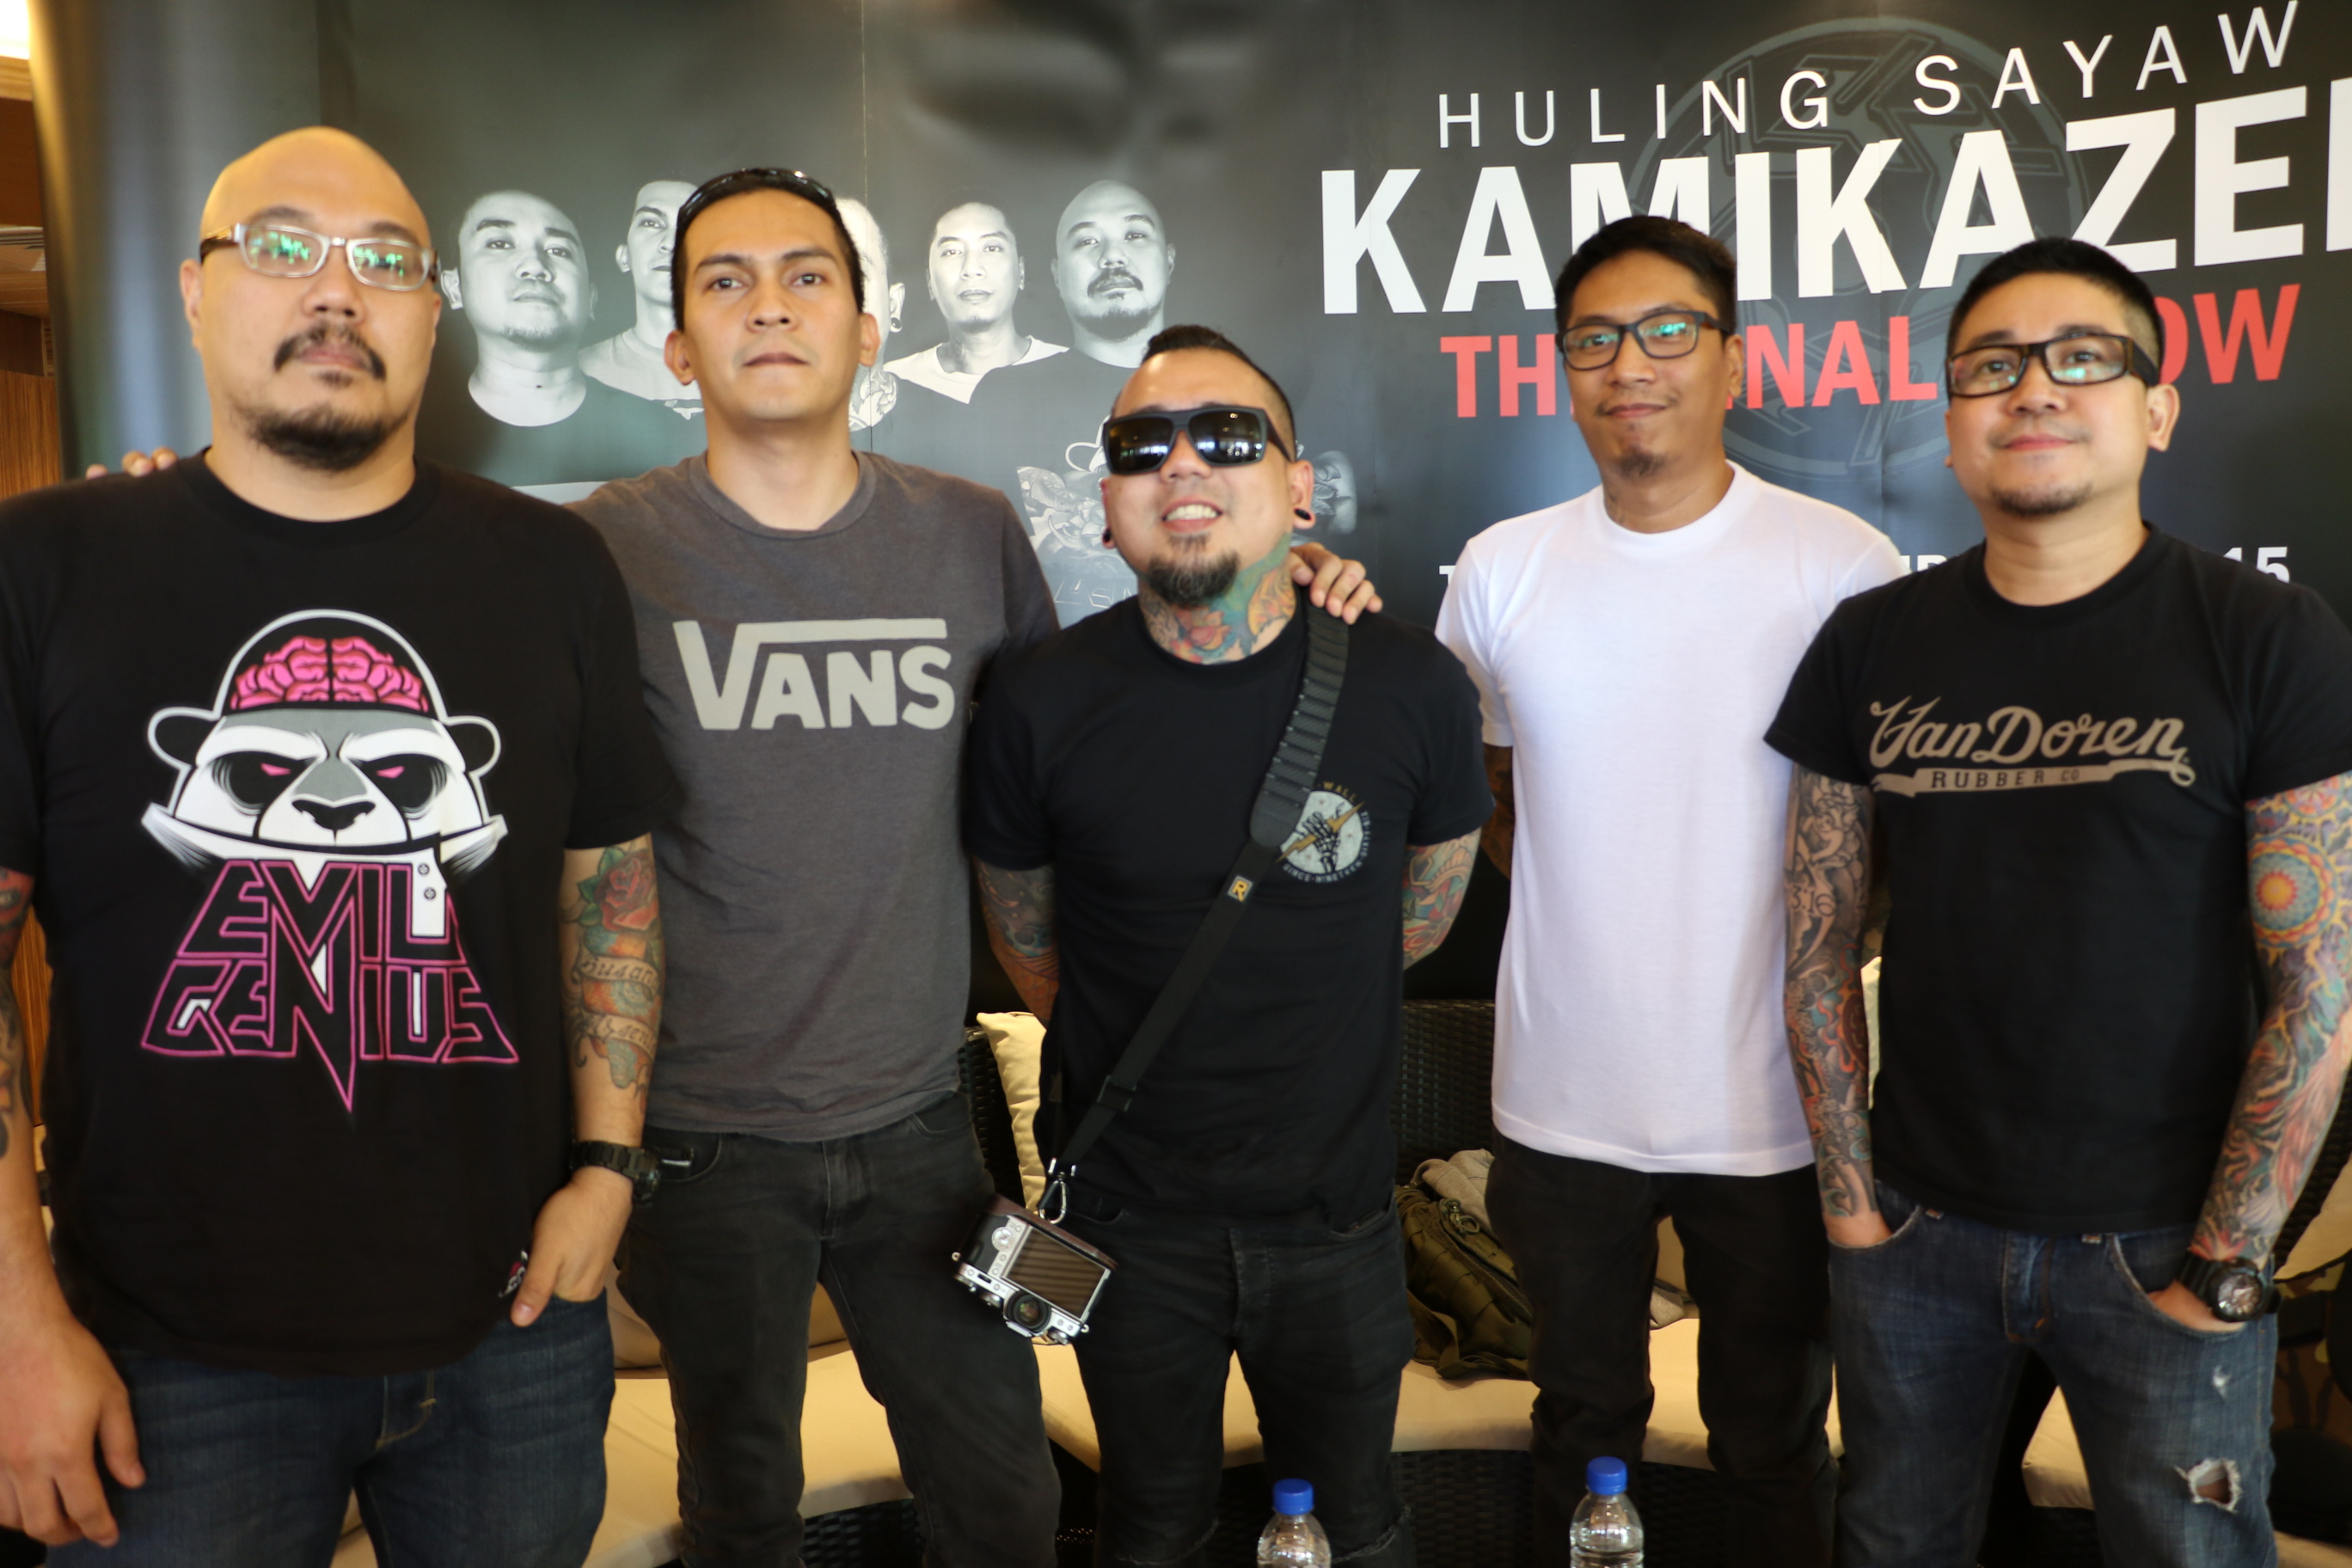 5 career lessons from Kamikazee
